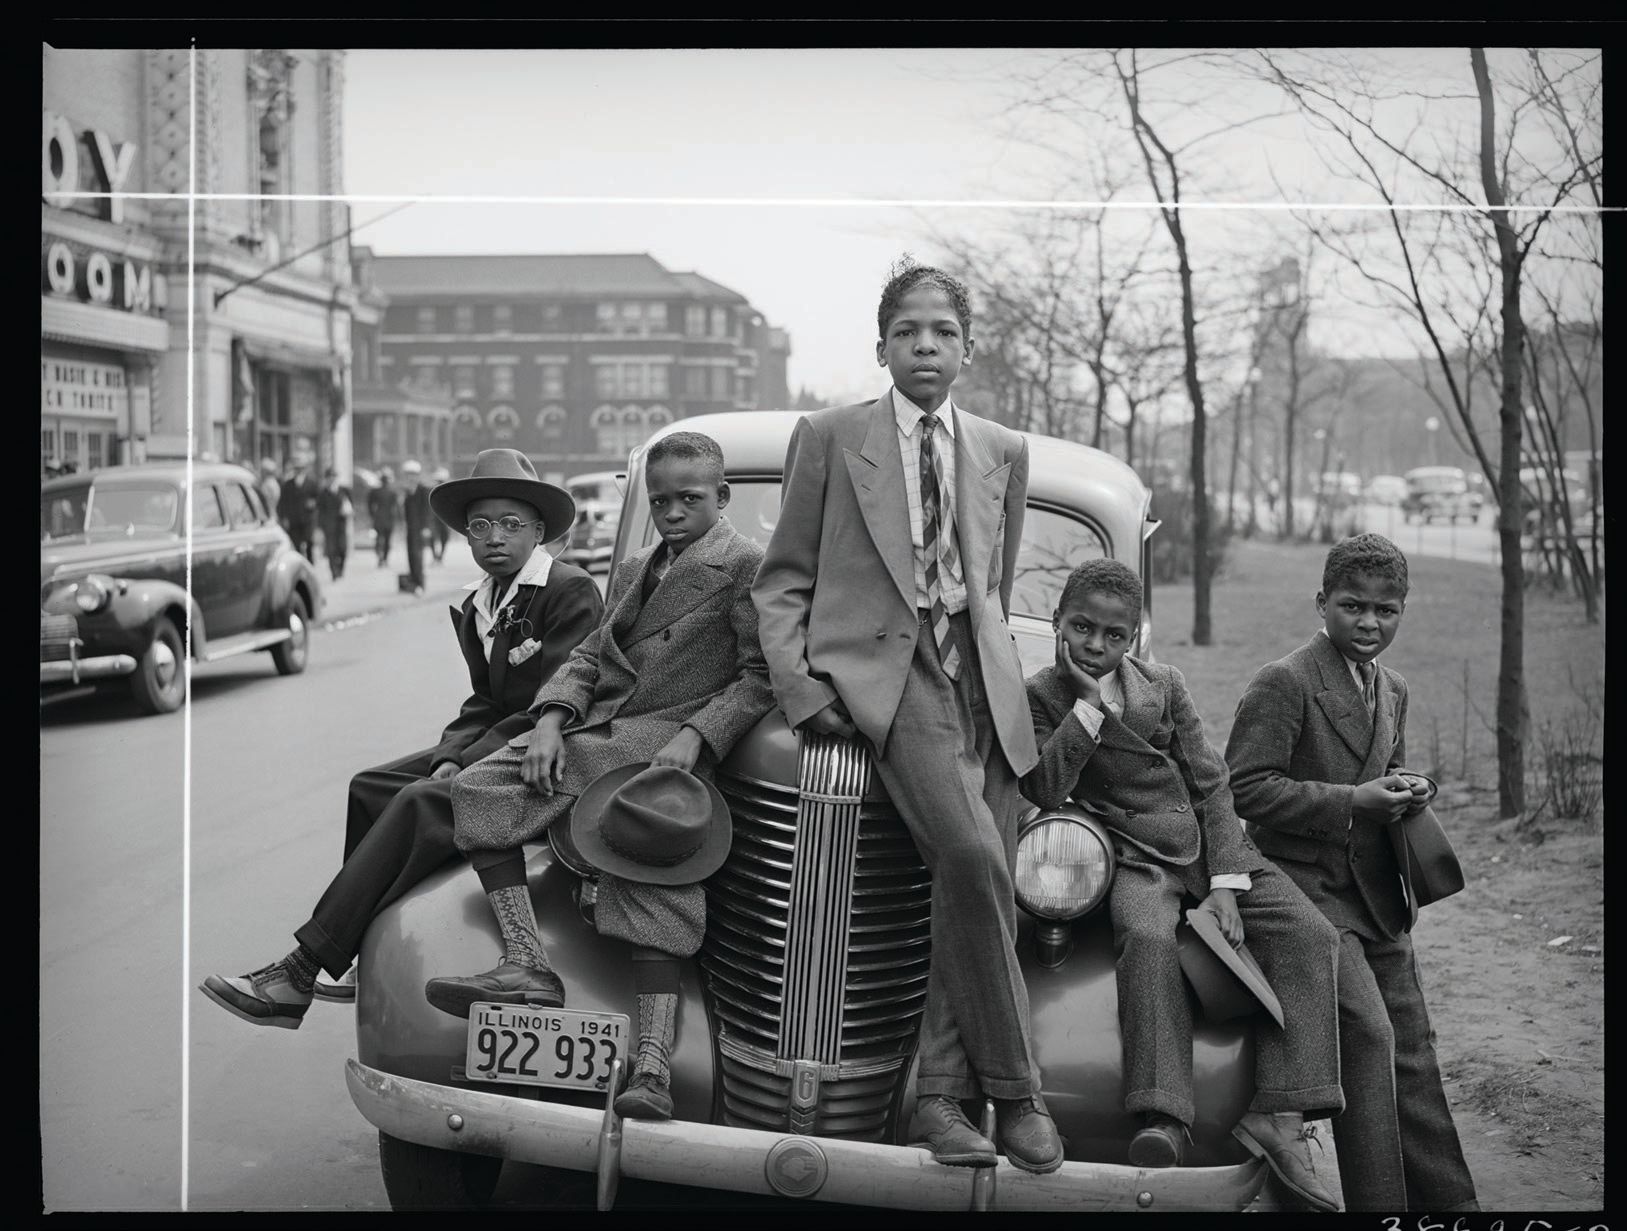 “Negro boys on Easter morning. Southside, Chicago, Illinois” (1941) PHOTO BY RUSSELL LEE. FARM SECURITY ADMINISTRATION/OFFICE OF WAR INFORMATION PHOTOGRAPH COLLECTION, PRINTS & PHOTOGRAPHS DIVISION, LIBRARY OF CONGRESS, LC-DIG-PPMSC-00256